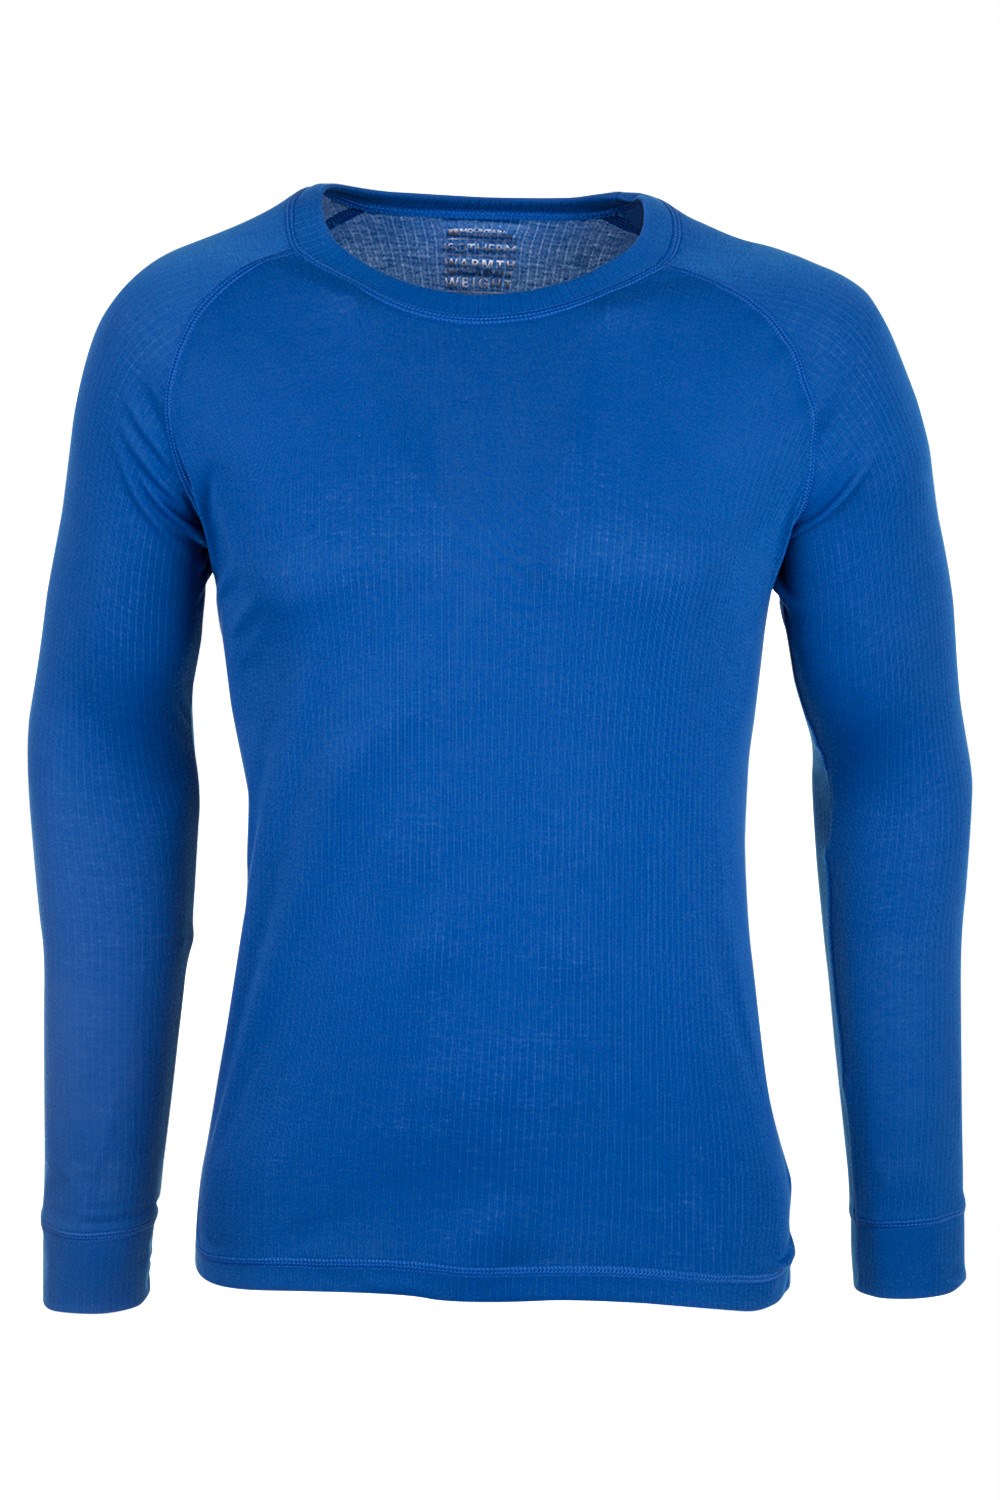 Mens Long Sleeve Zip Neck Base Layer Top Thermal Mountain Warehouse Lightweight 